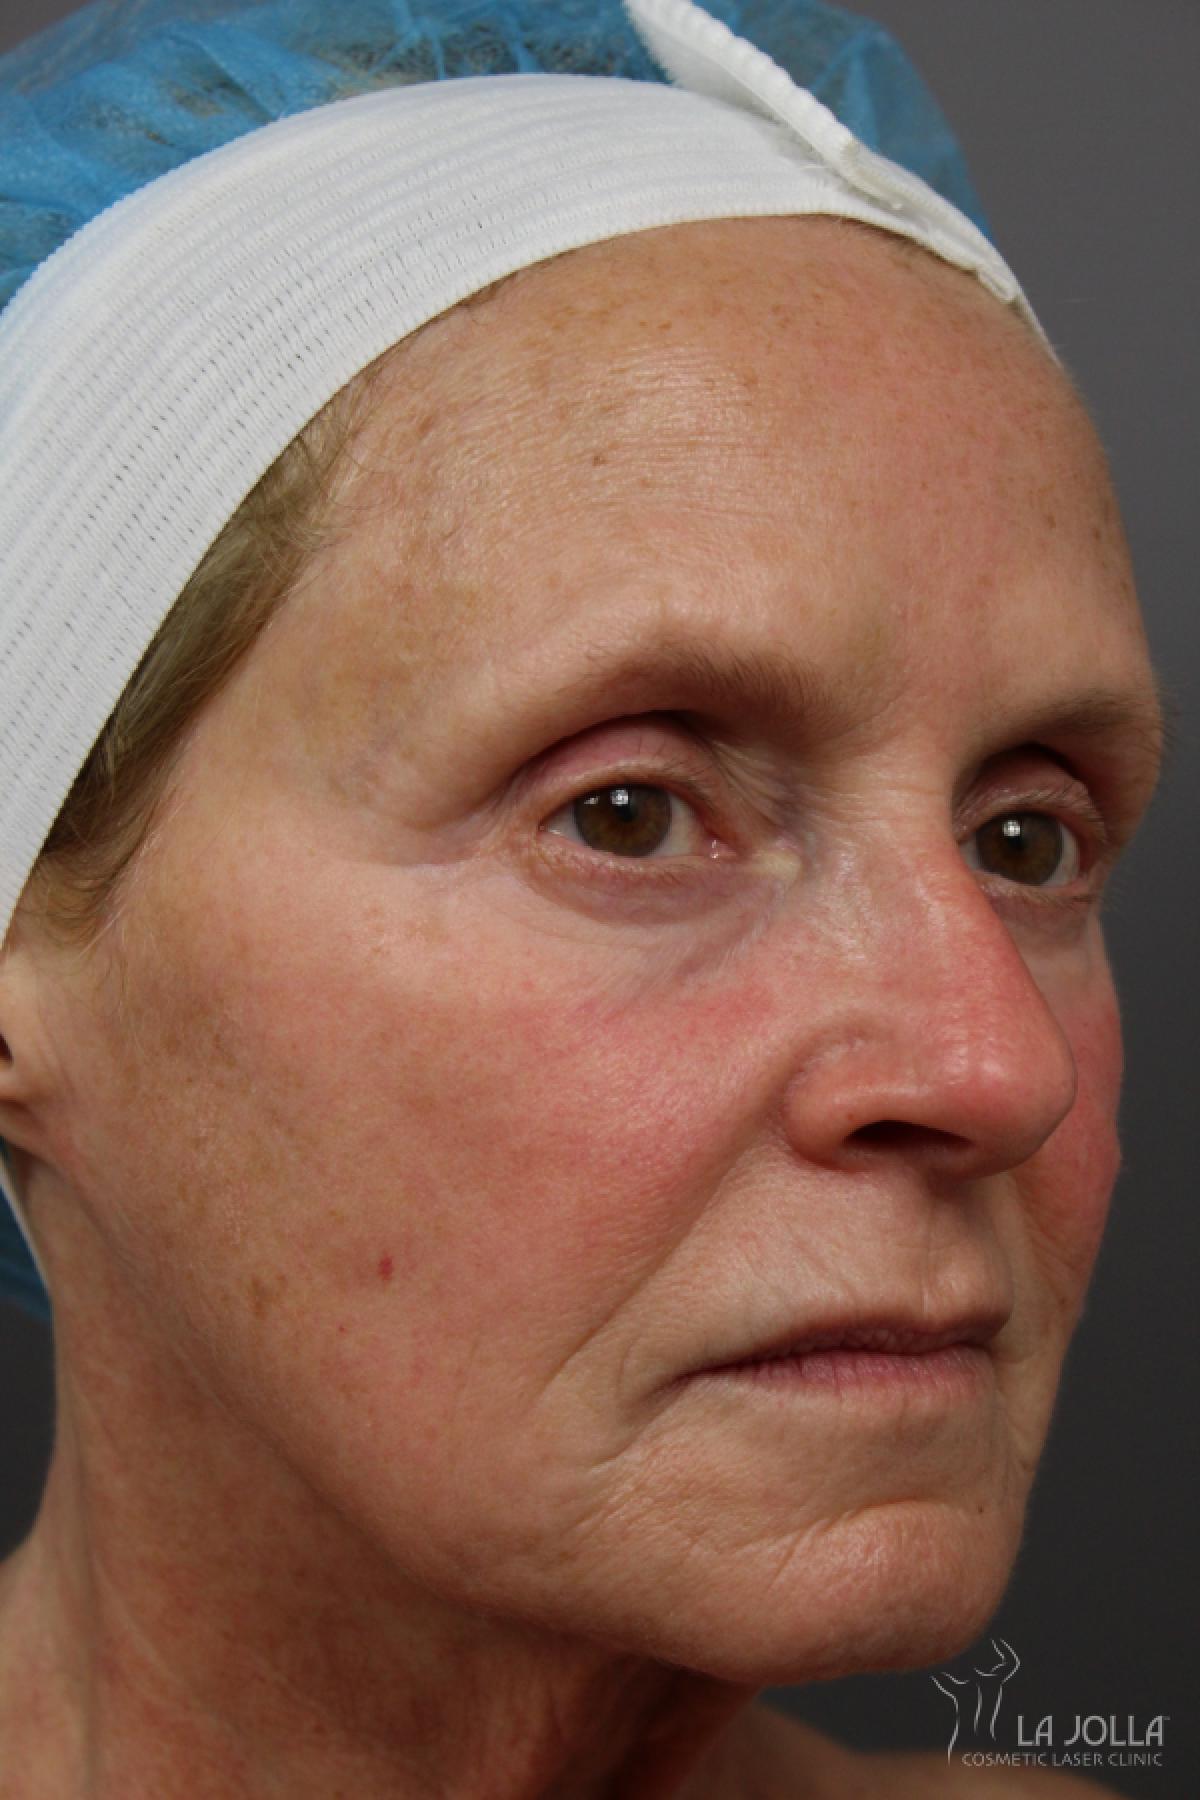 Laser Skin Resurfacing: Patient 2 - Before and After 2